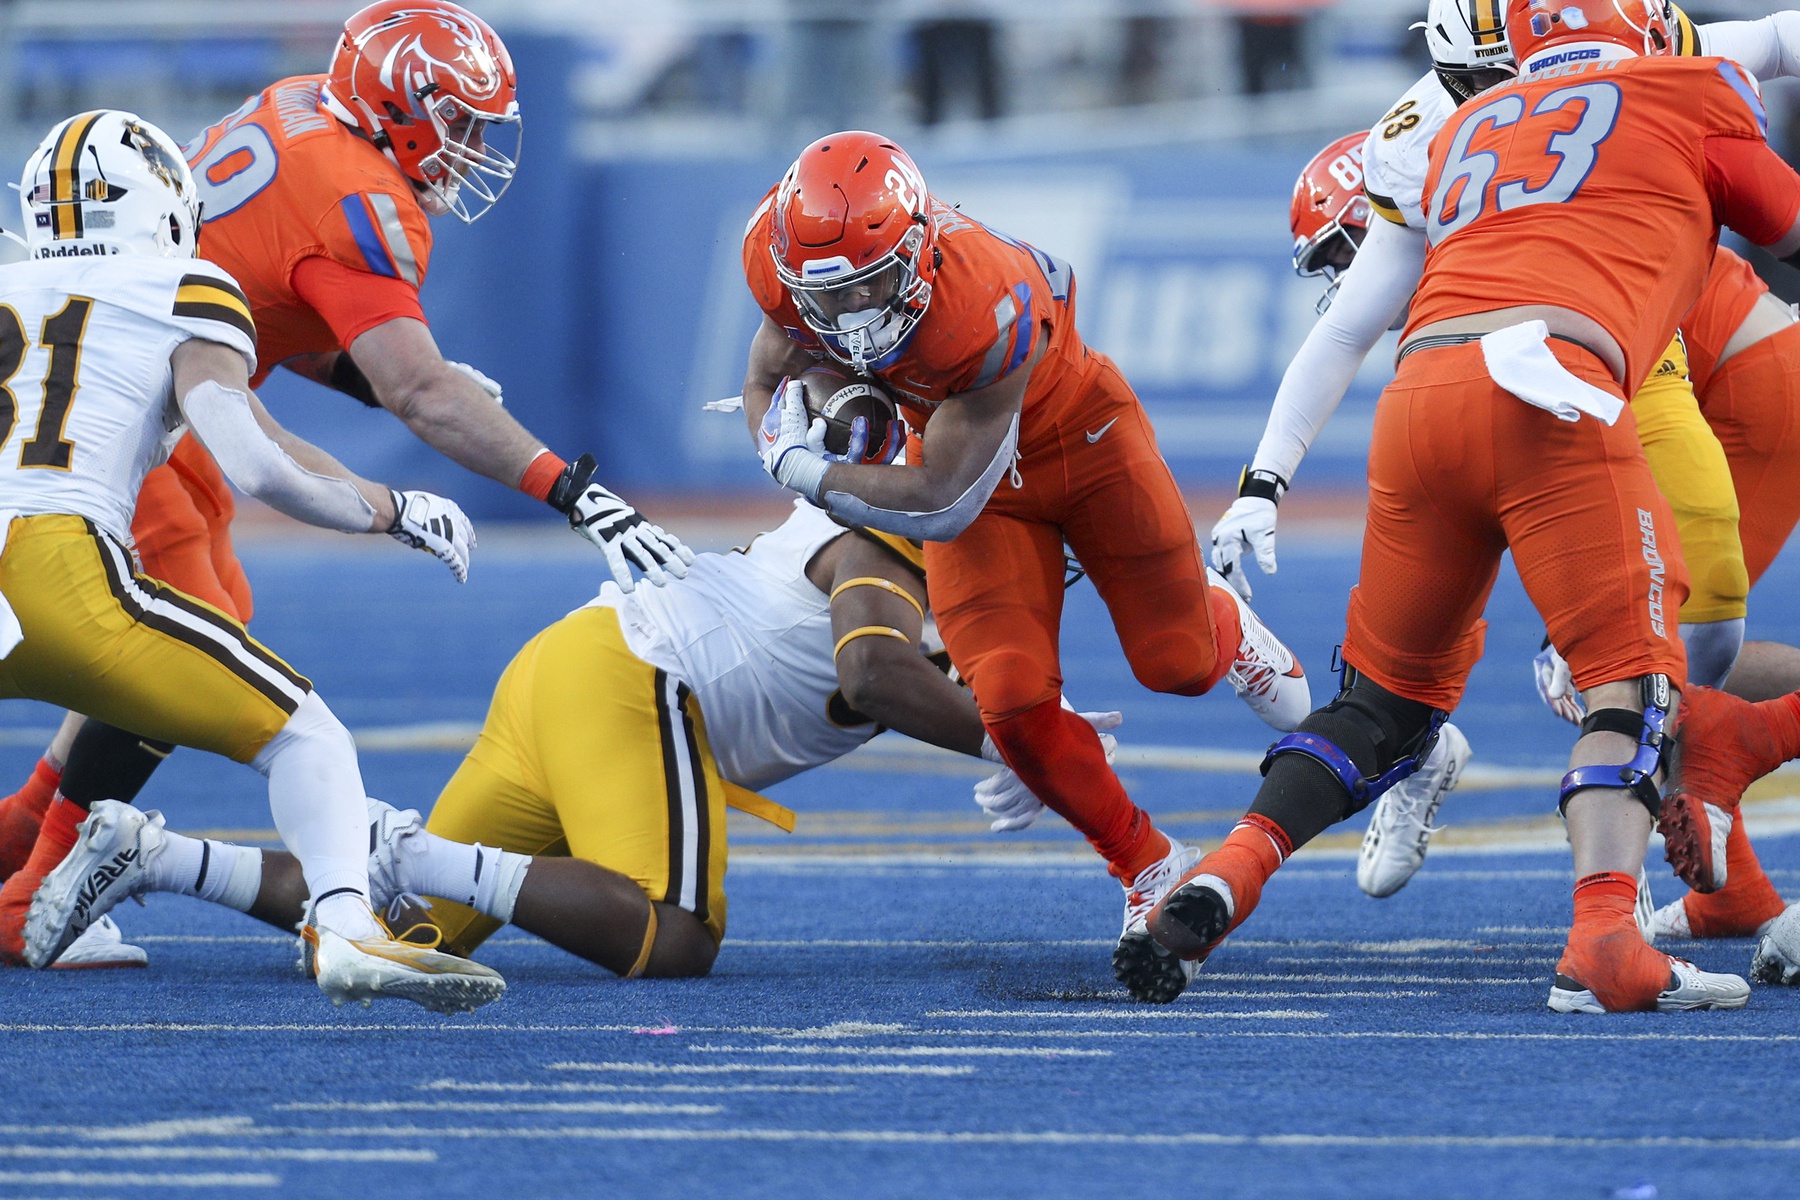 Boise State Broncos running back George Holani (24) during the second half against the Wyoming Cowboys at Albertsons Stadium. Boise State defeats Wyoming 32-7.